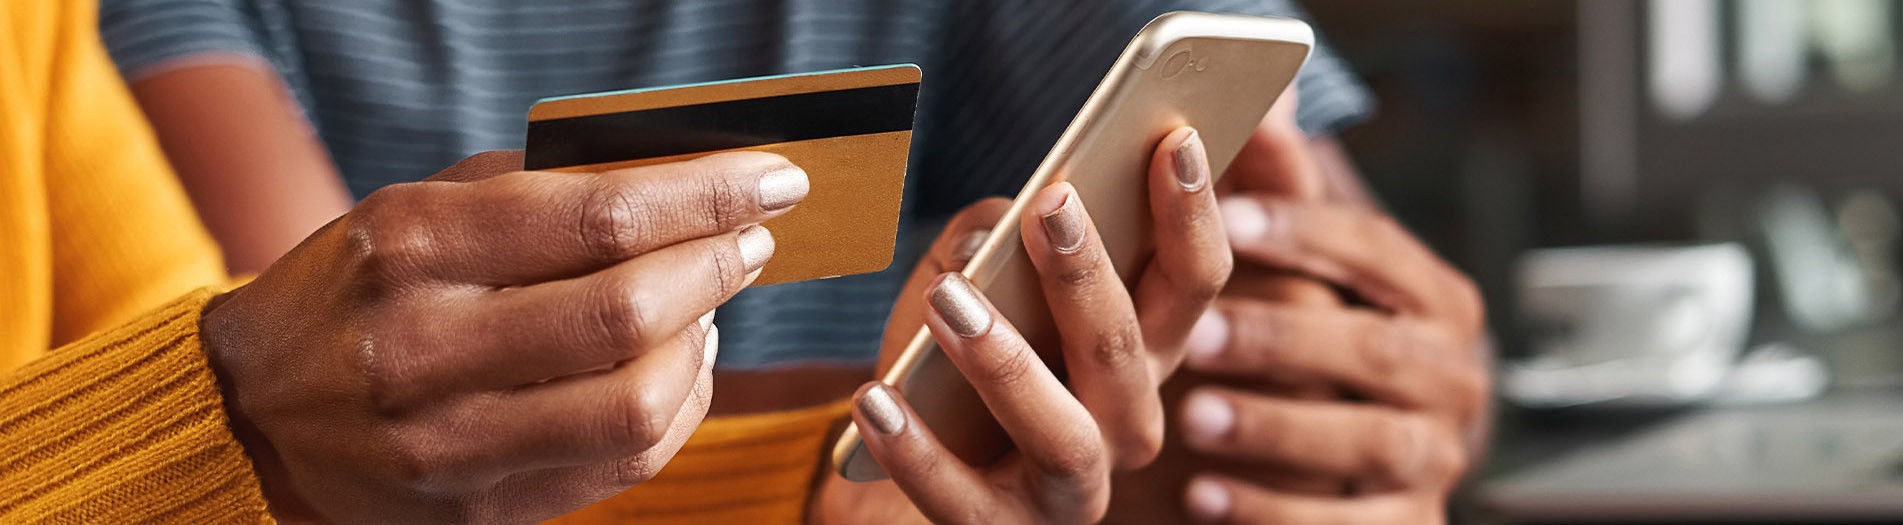 gold debit card and mobile device